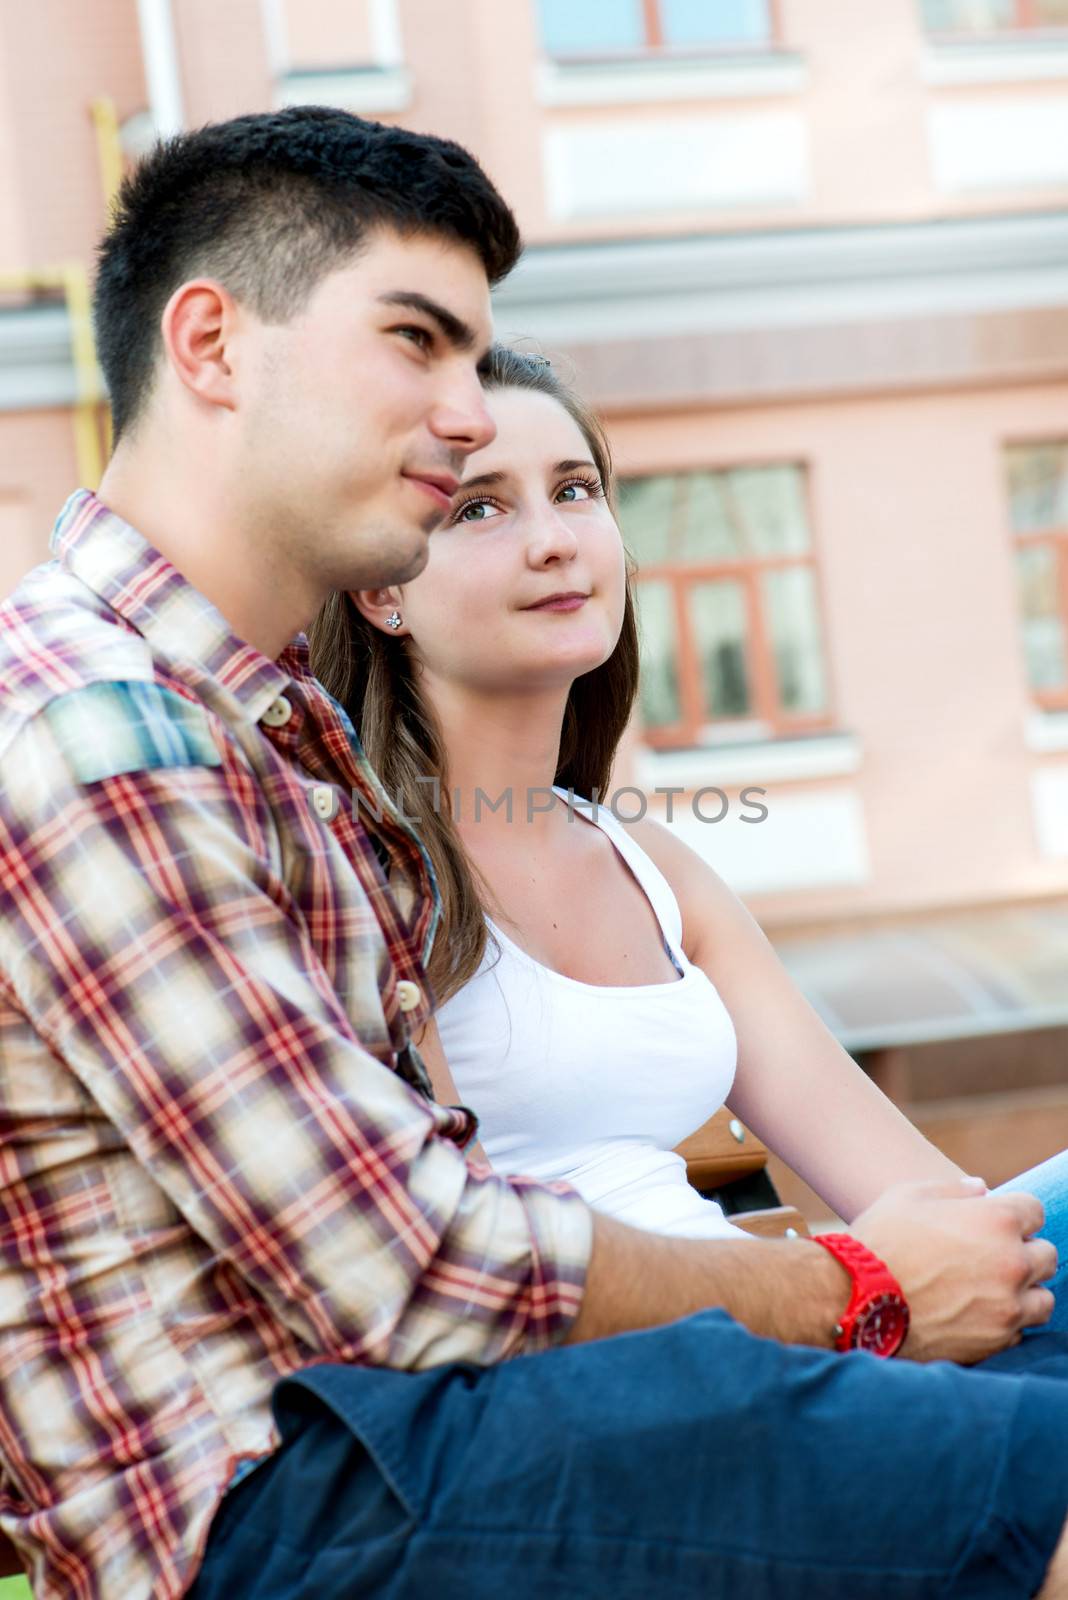 Young couple sitting on bench on street. Side view